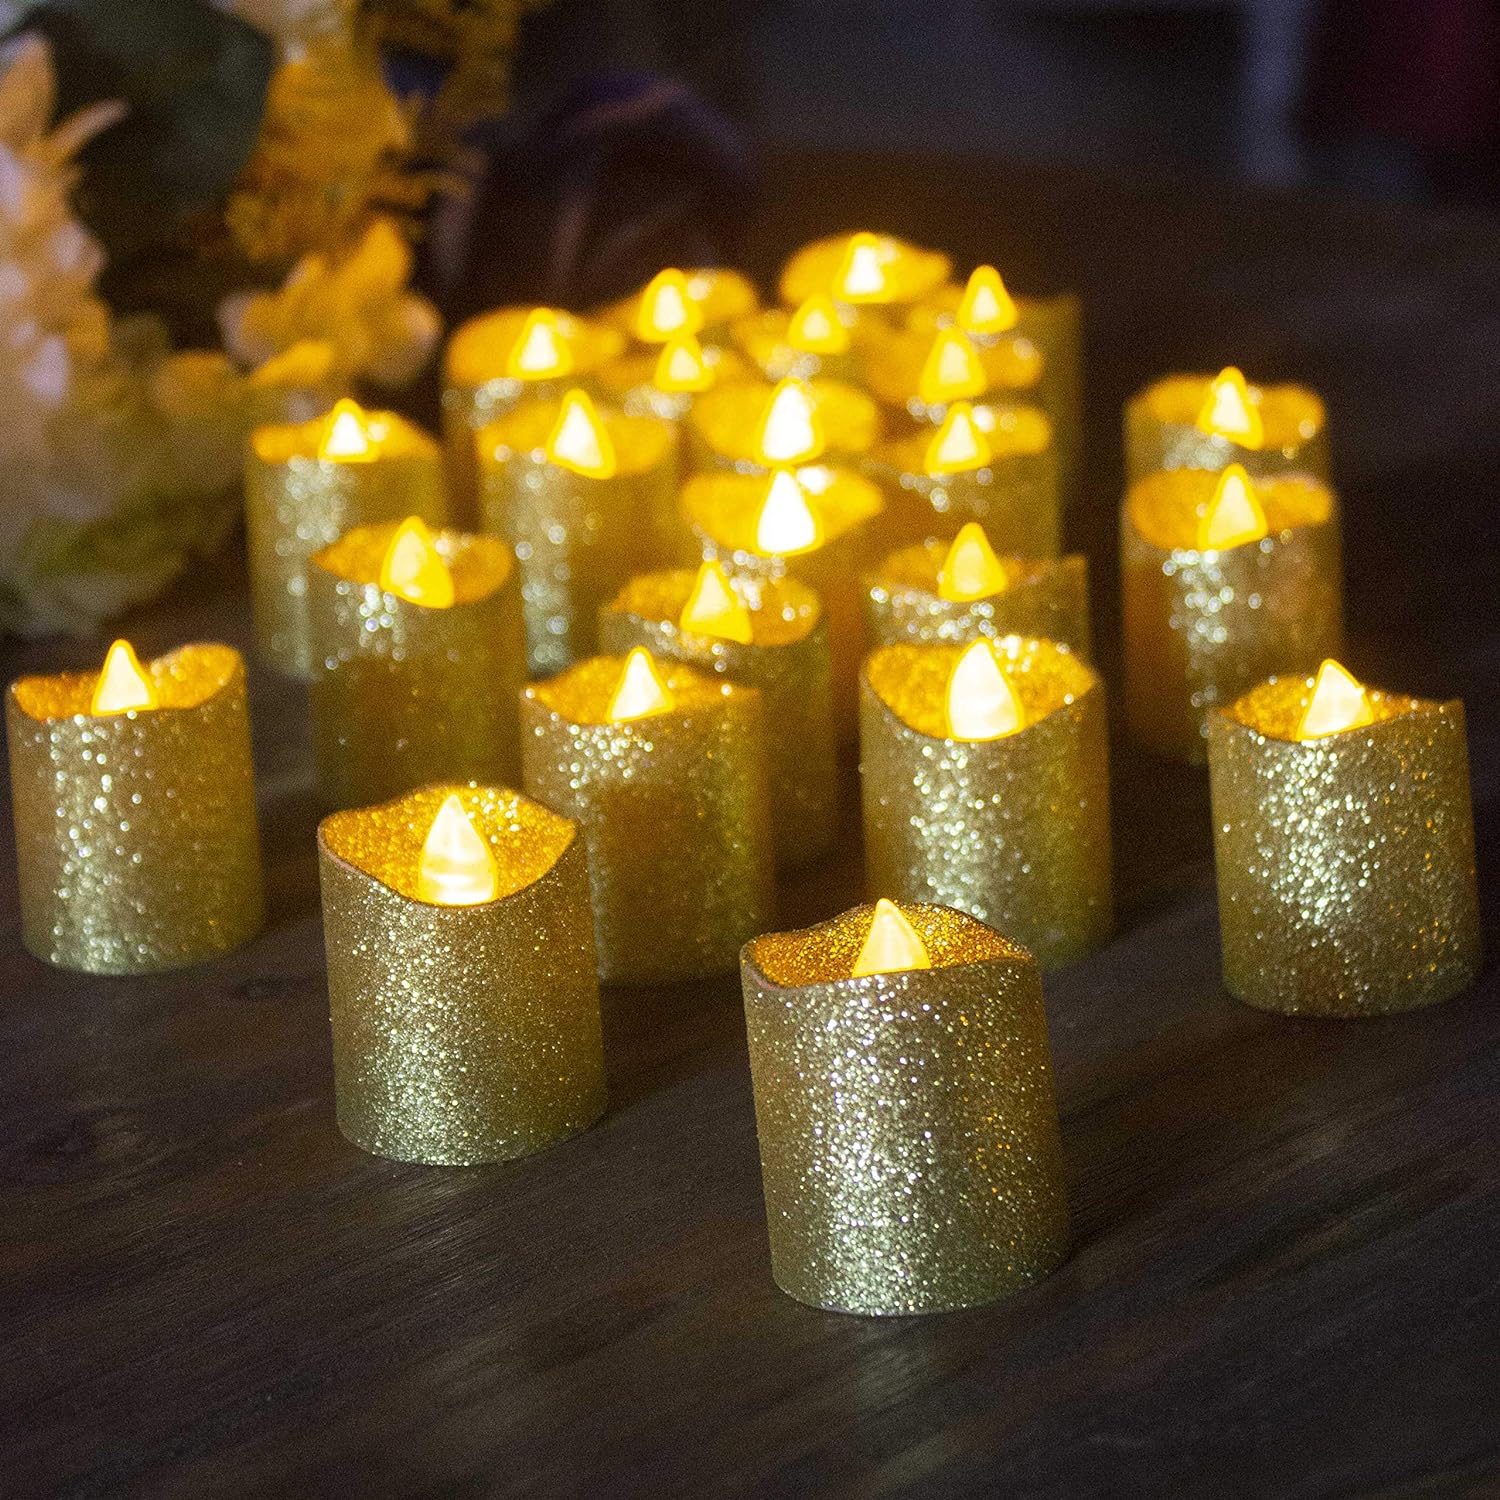 LOGUIDE Gold Flameless Votive Candles,24 Pack Battery Operated Gold Glitter Flickering Fake LED Tea Lights for Wedding Centerpieces,Tab